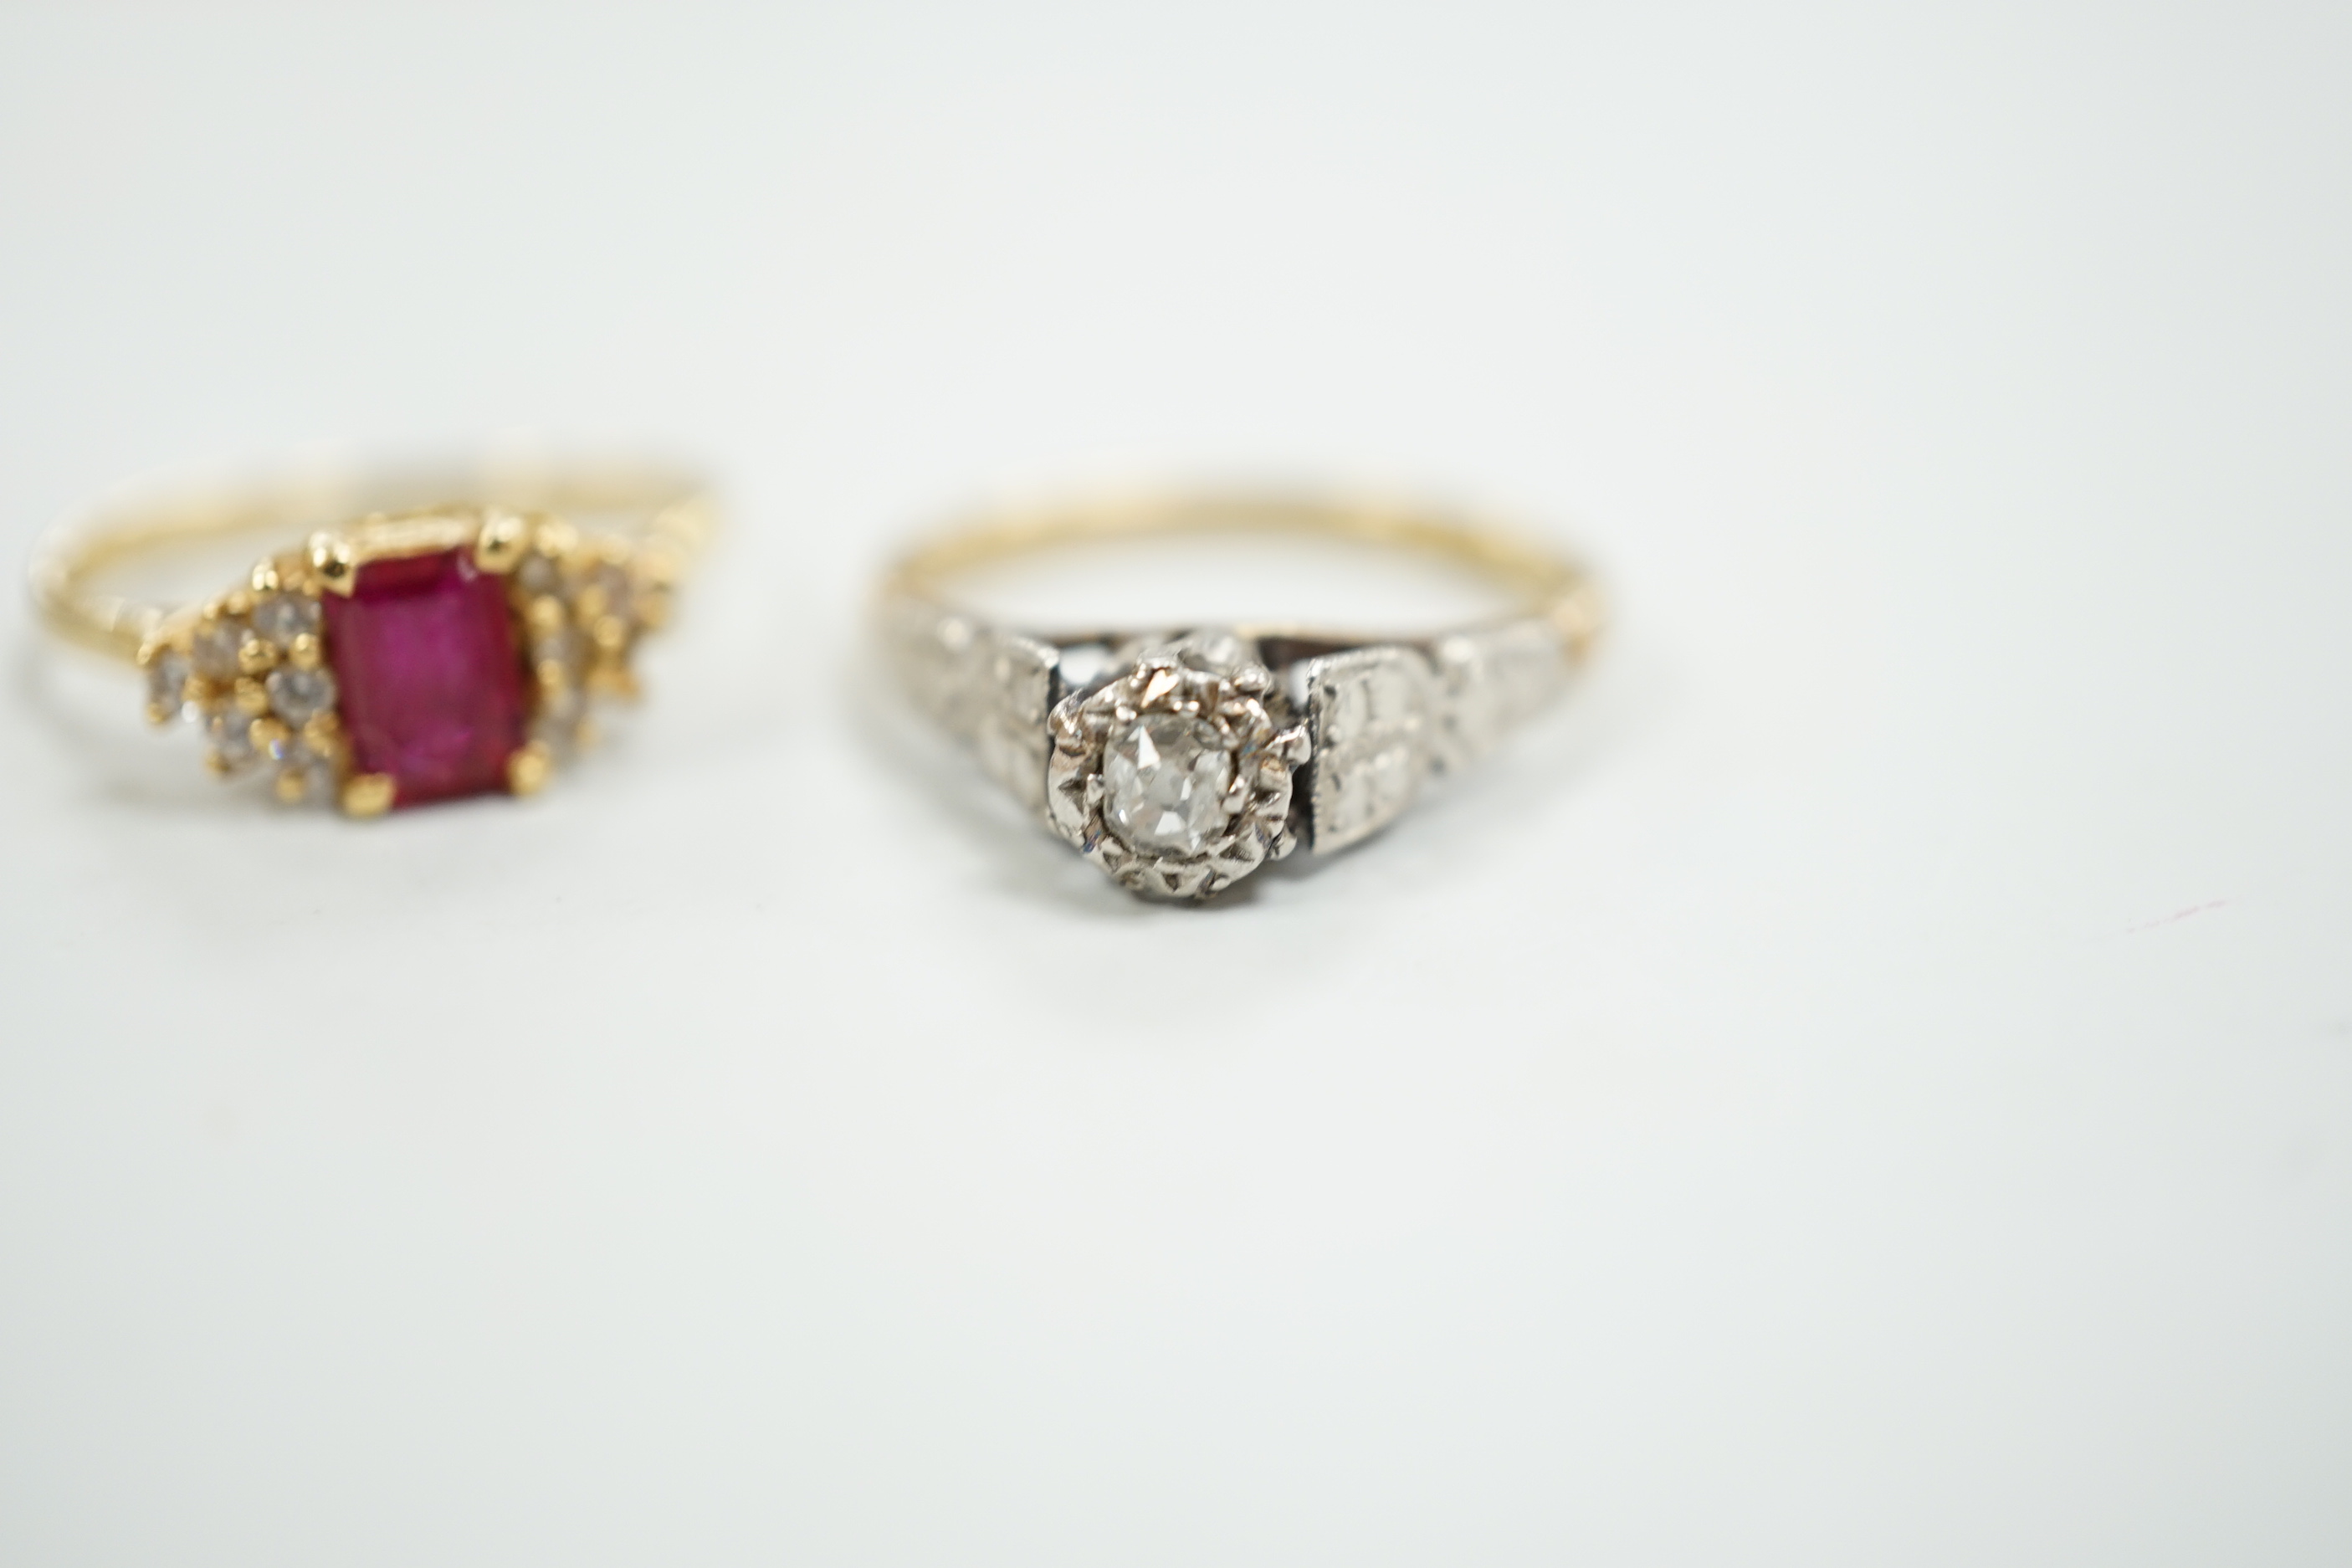 Two 18ct and gem set rings, including illusion set diamond, gross weight 5.5 grams.